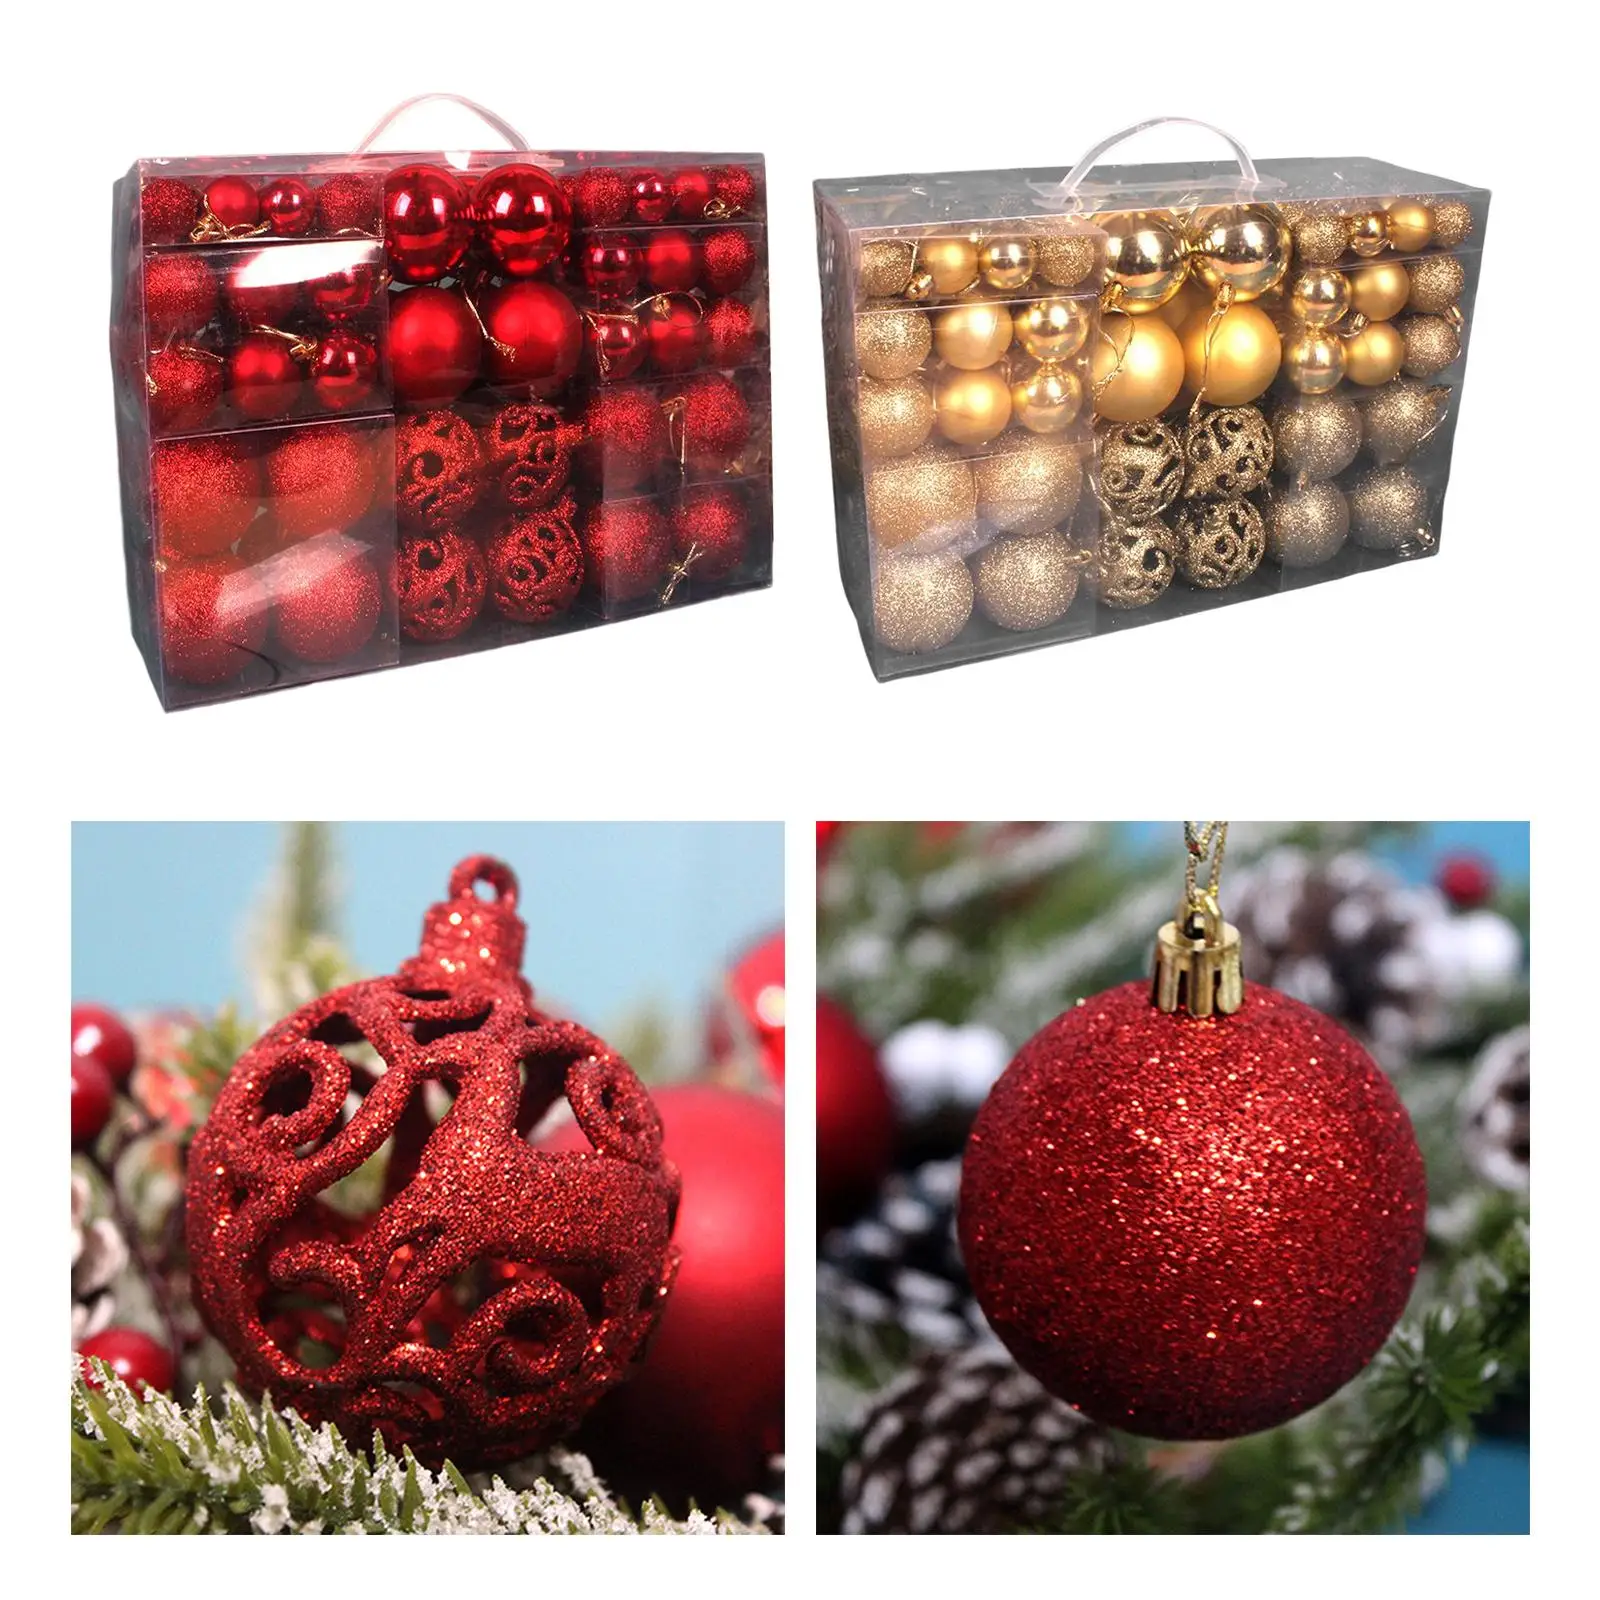 100x Christmas Ball Ornaments Tree Decorative Baubles DIY Hanging Xmas Decorations for Engagement New Year Indoor Festive Home